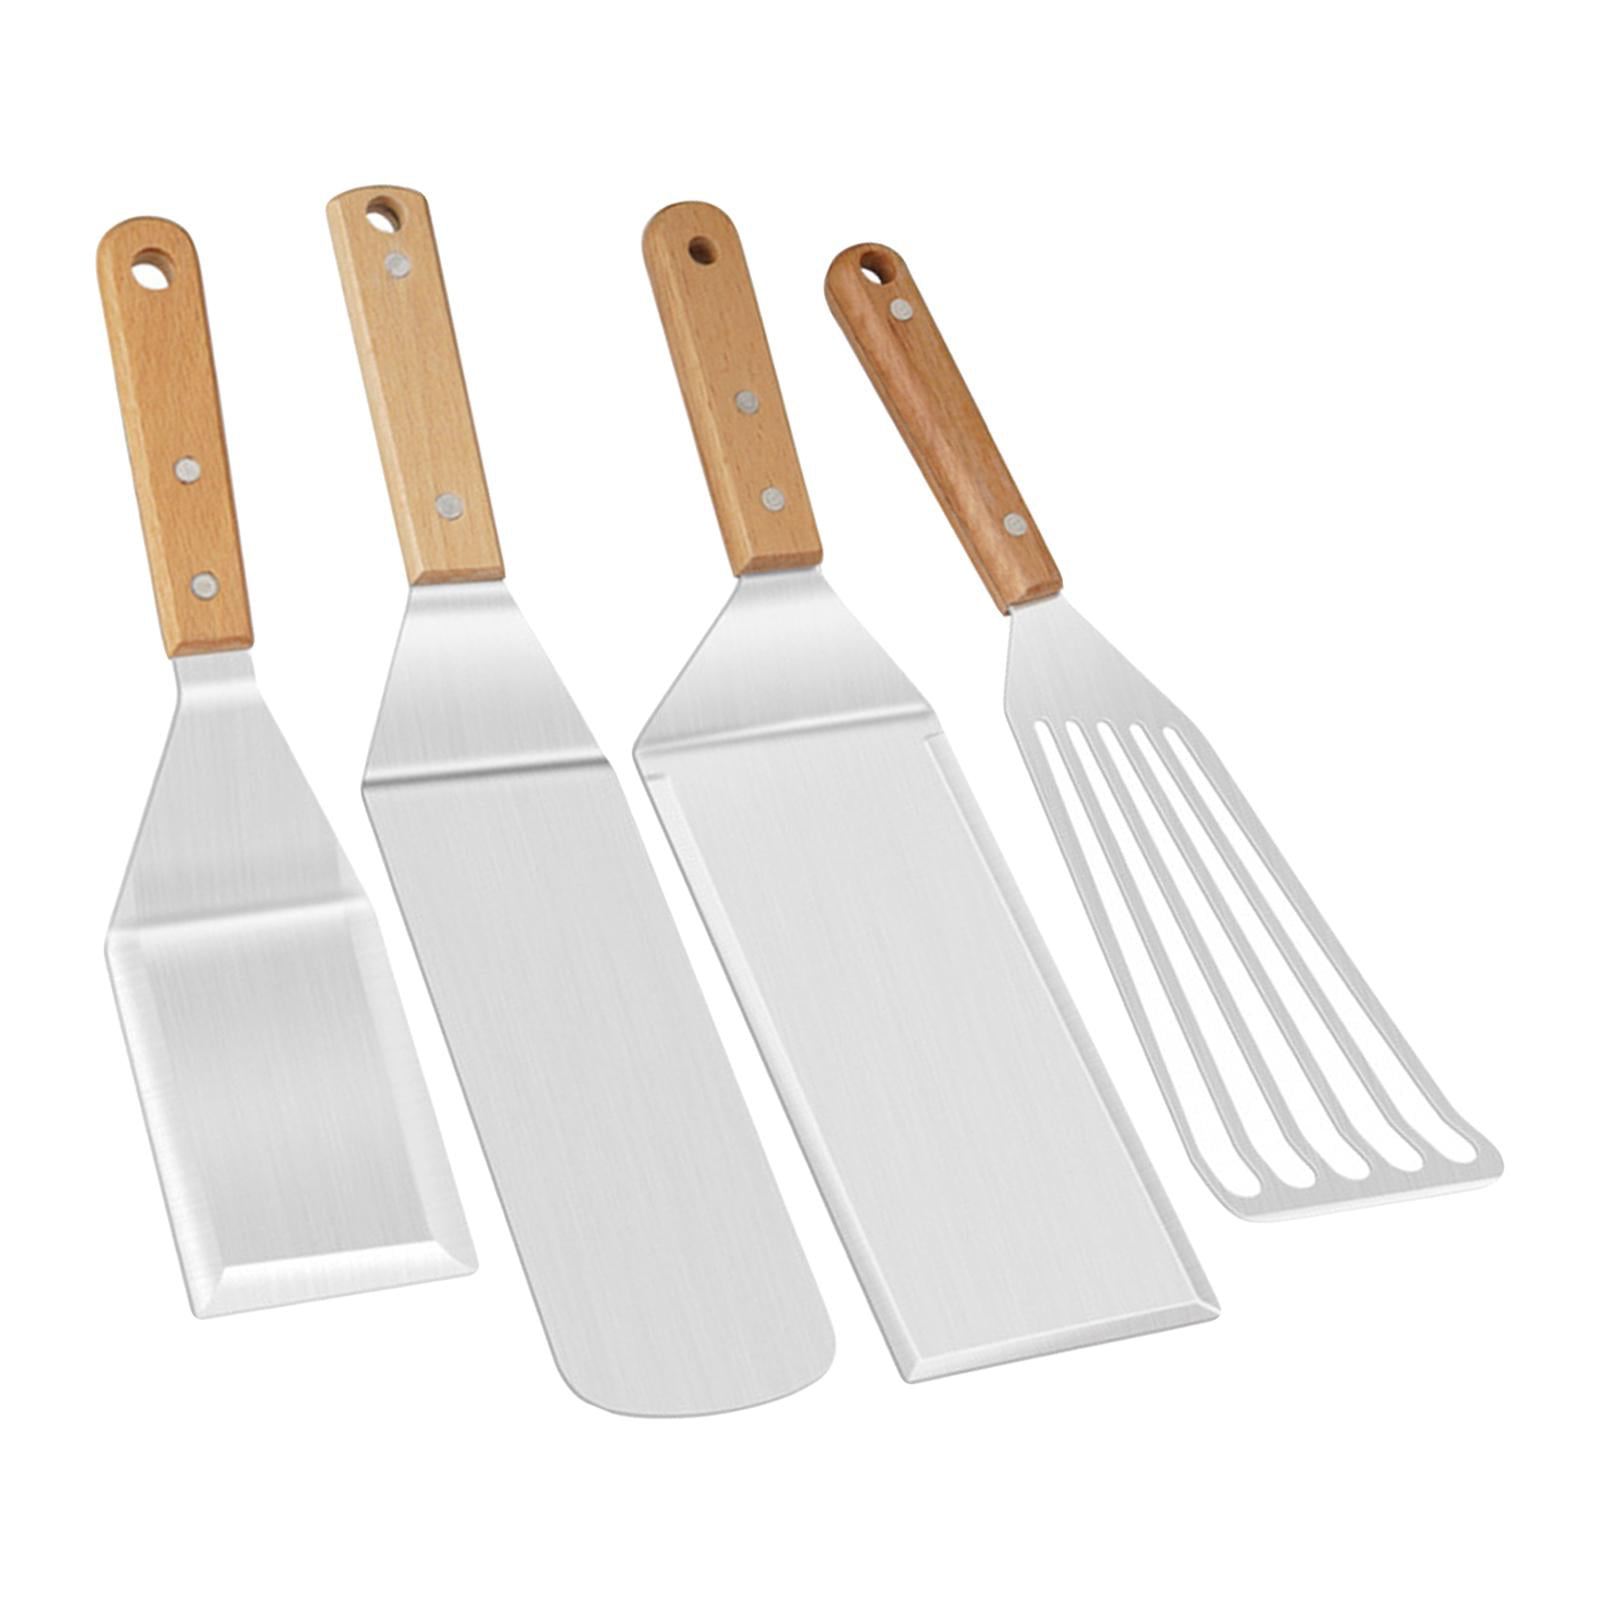 Griddle Accessories Set of 8,Stainless Steel Metal Spatula-Grill Spatula Scraper 